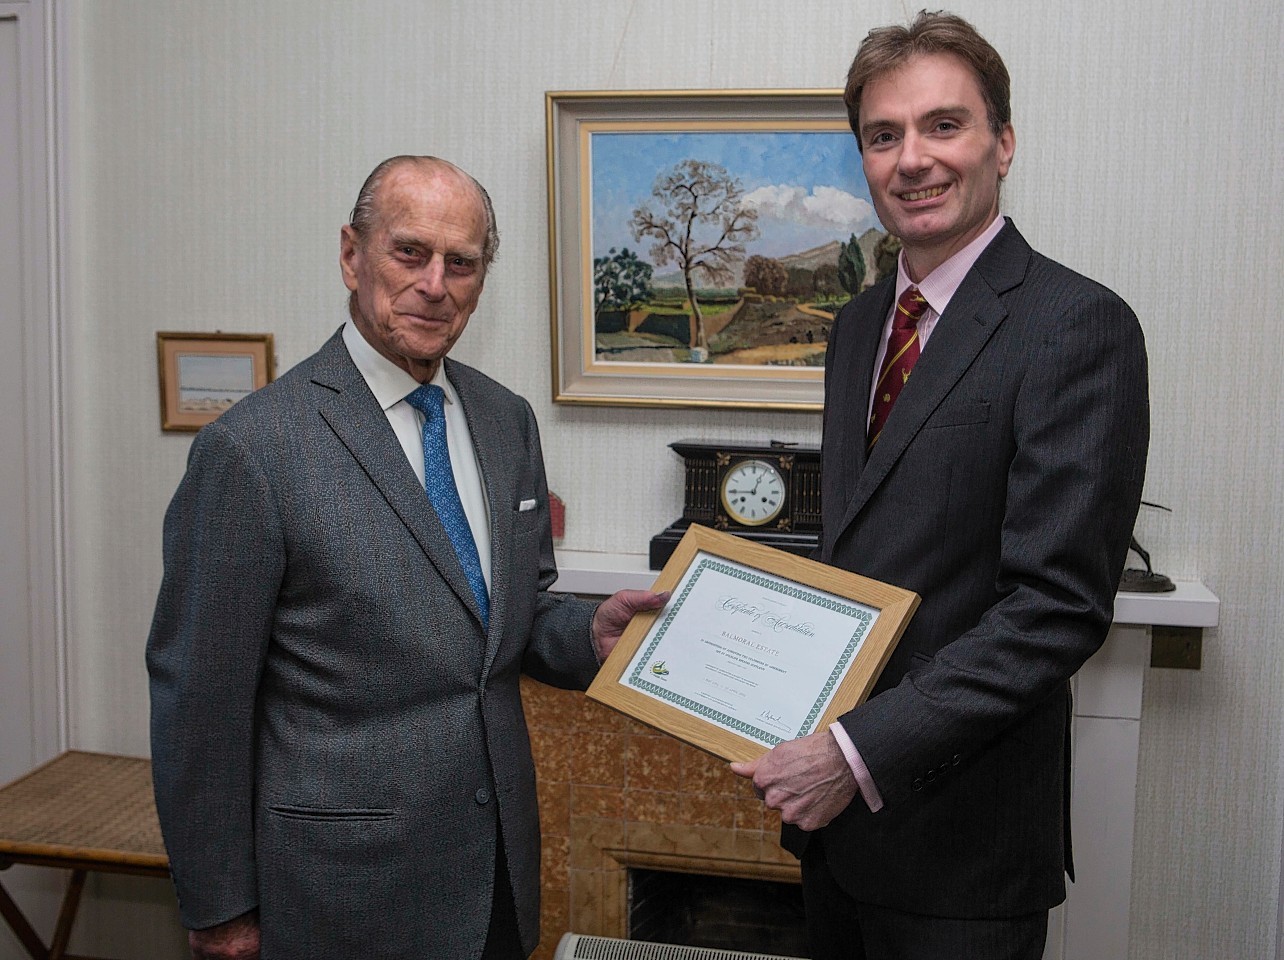 The Duke collected an award recognising the Balmoral Estate's work on game and wildlife management